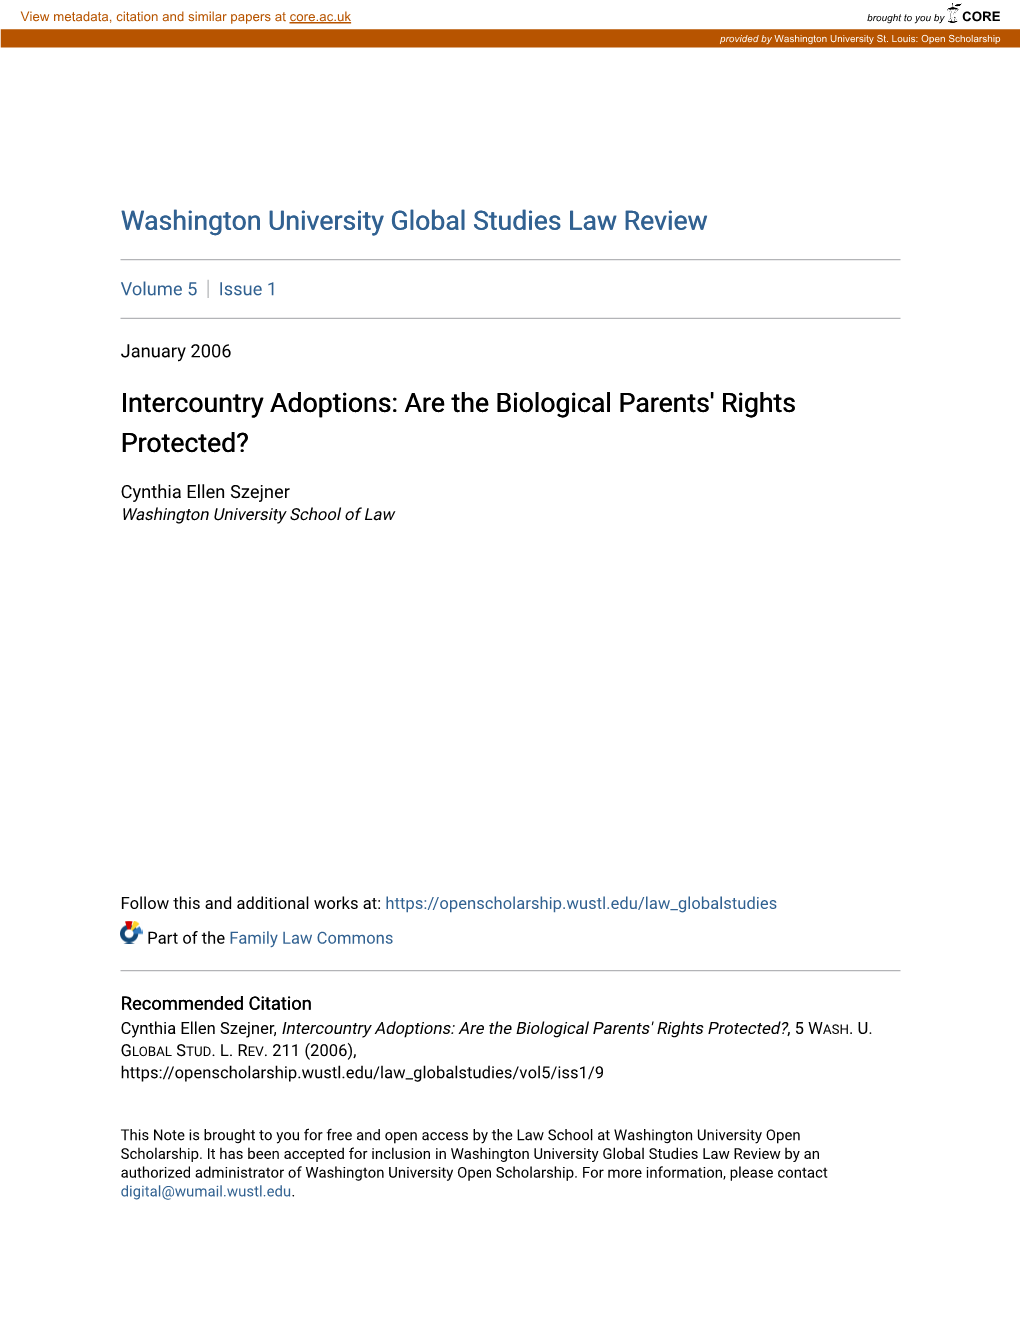 Intercountry Adoptions: Are the Biological Parents' Rights Protected?